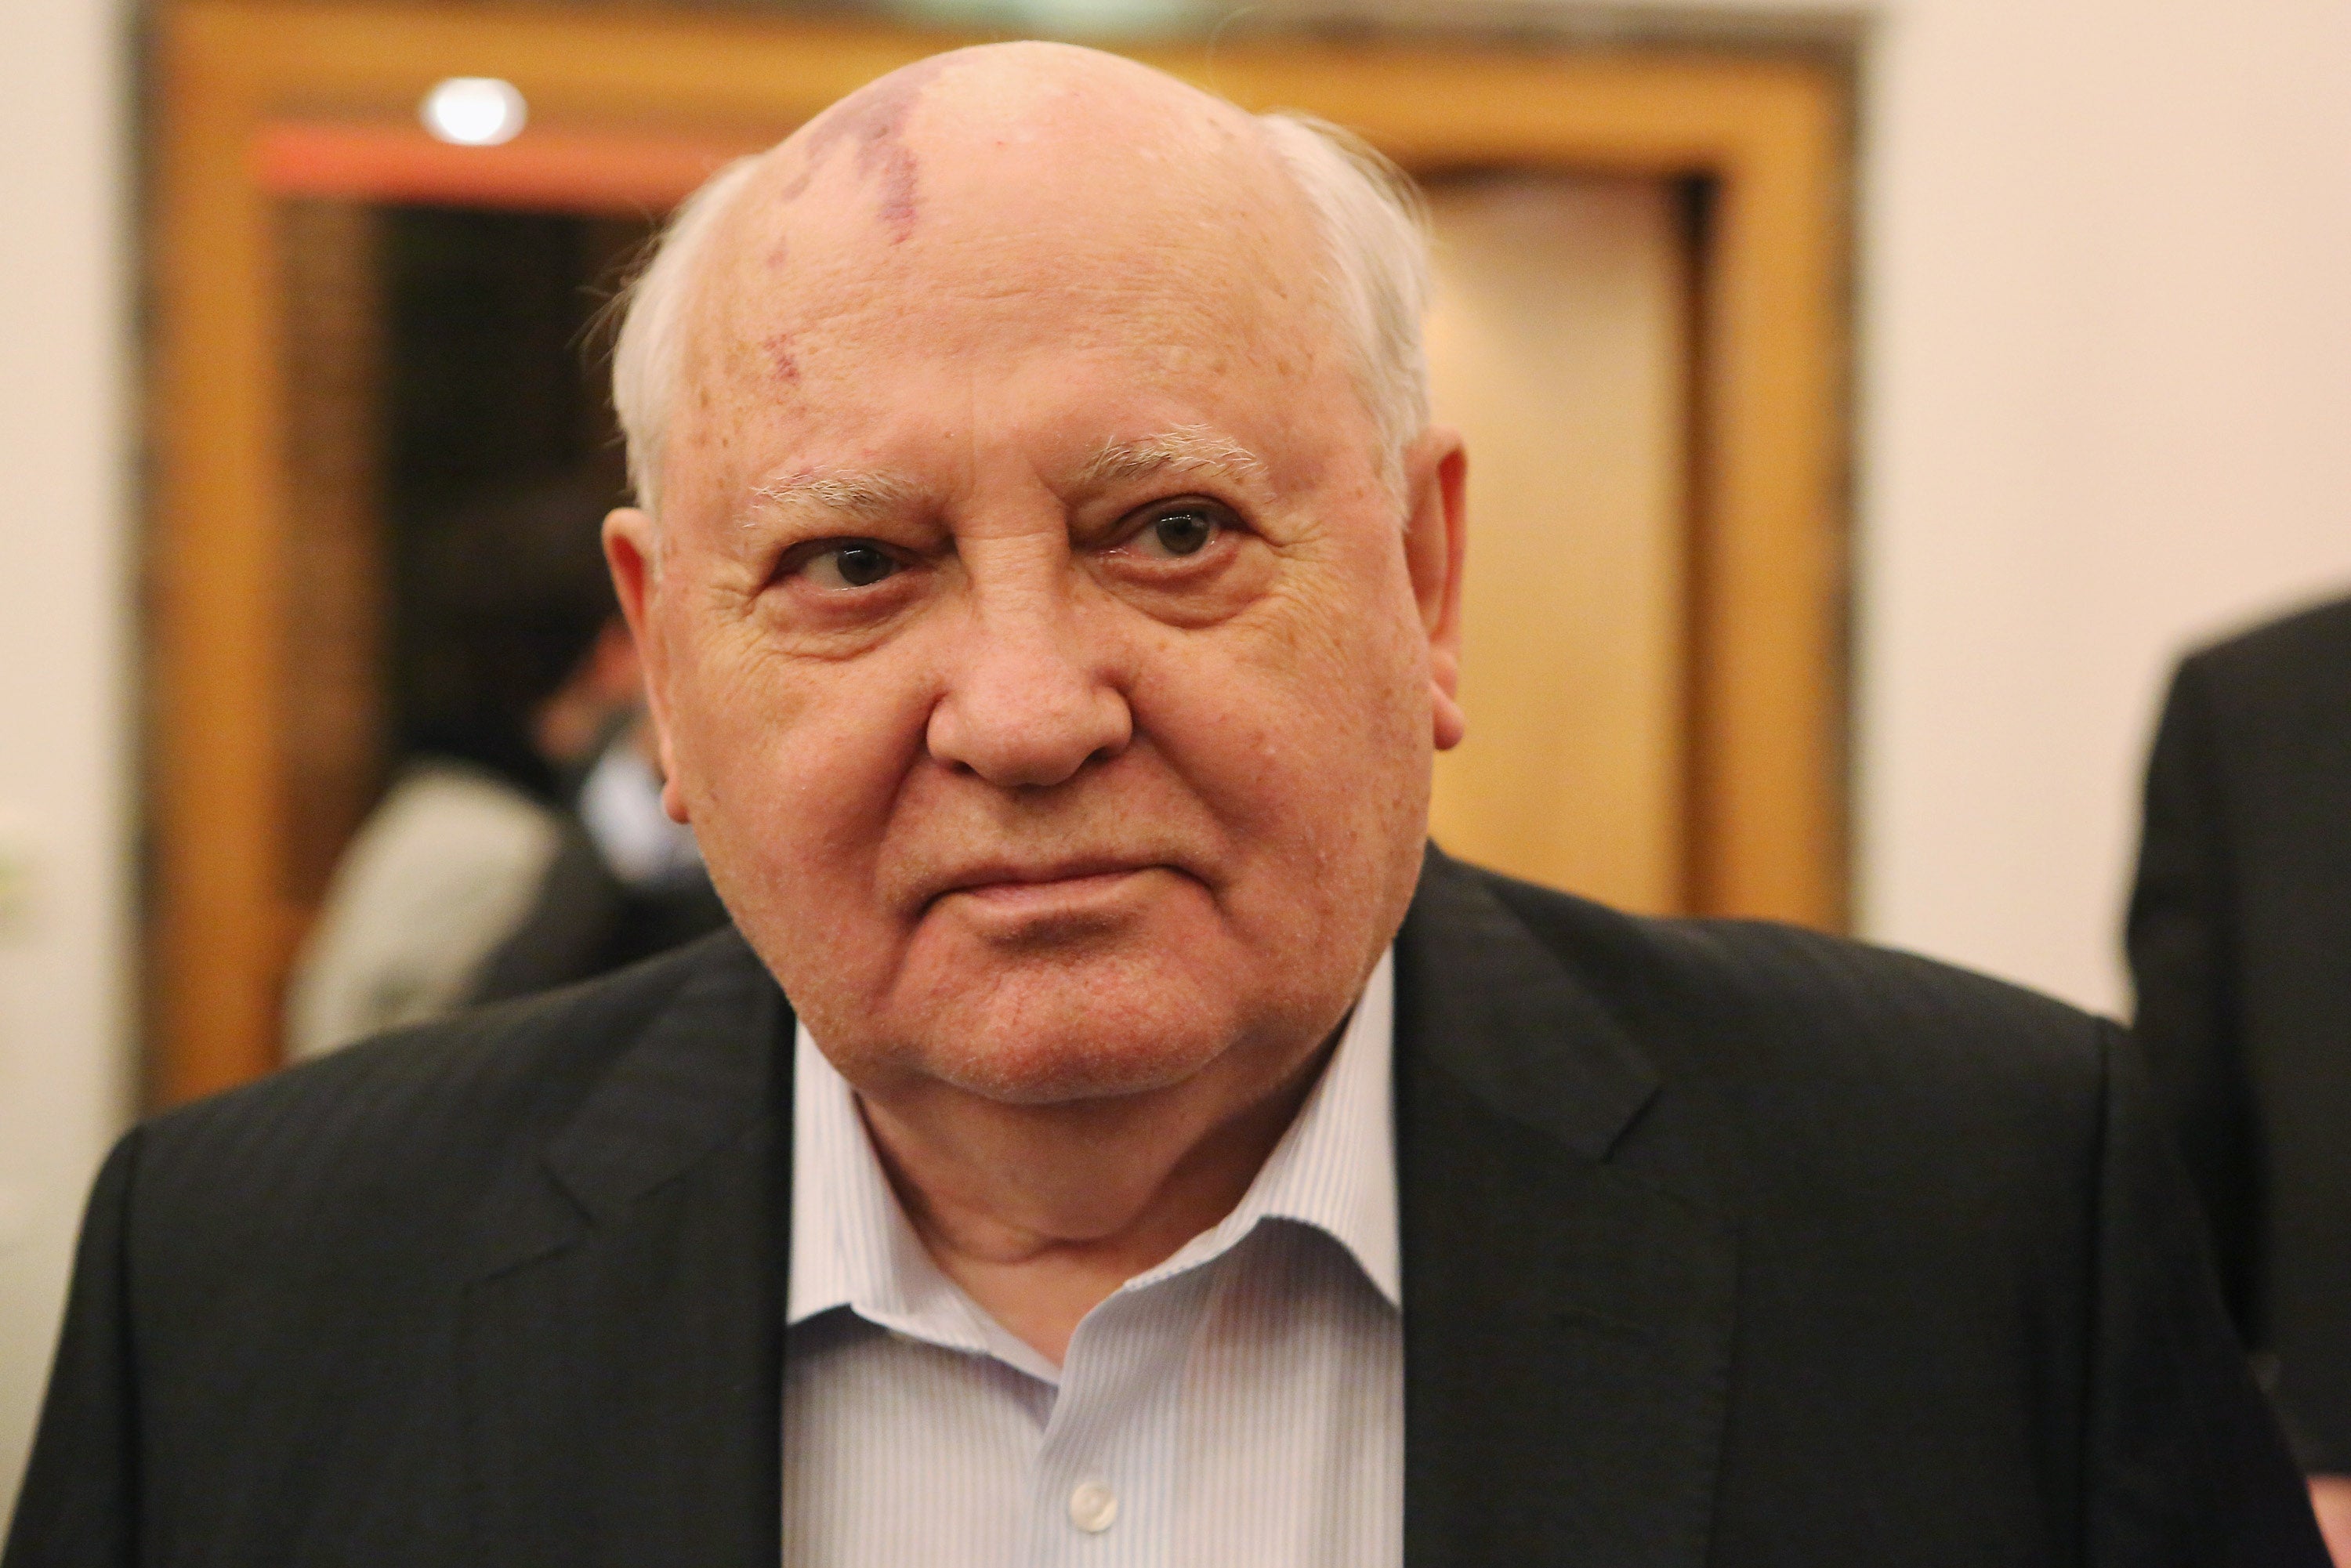 Mr Gorbachev is widely credited with helping to end the Cold War